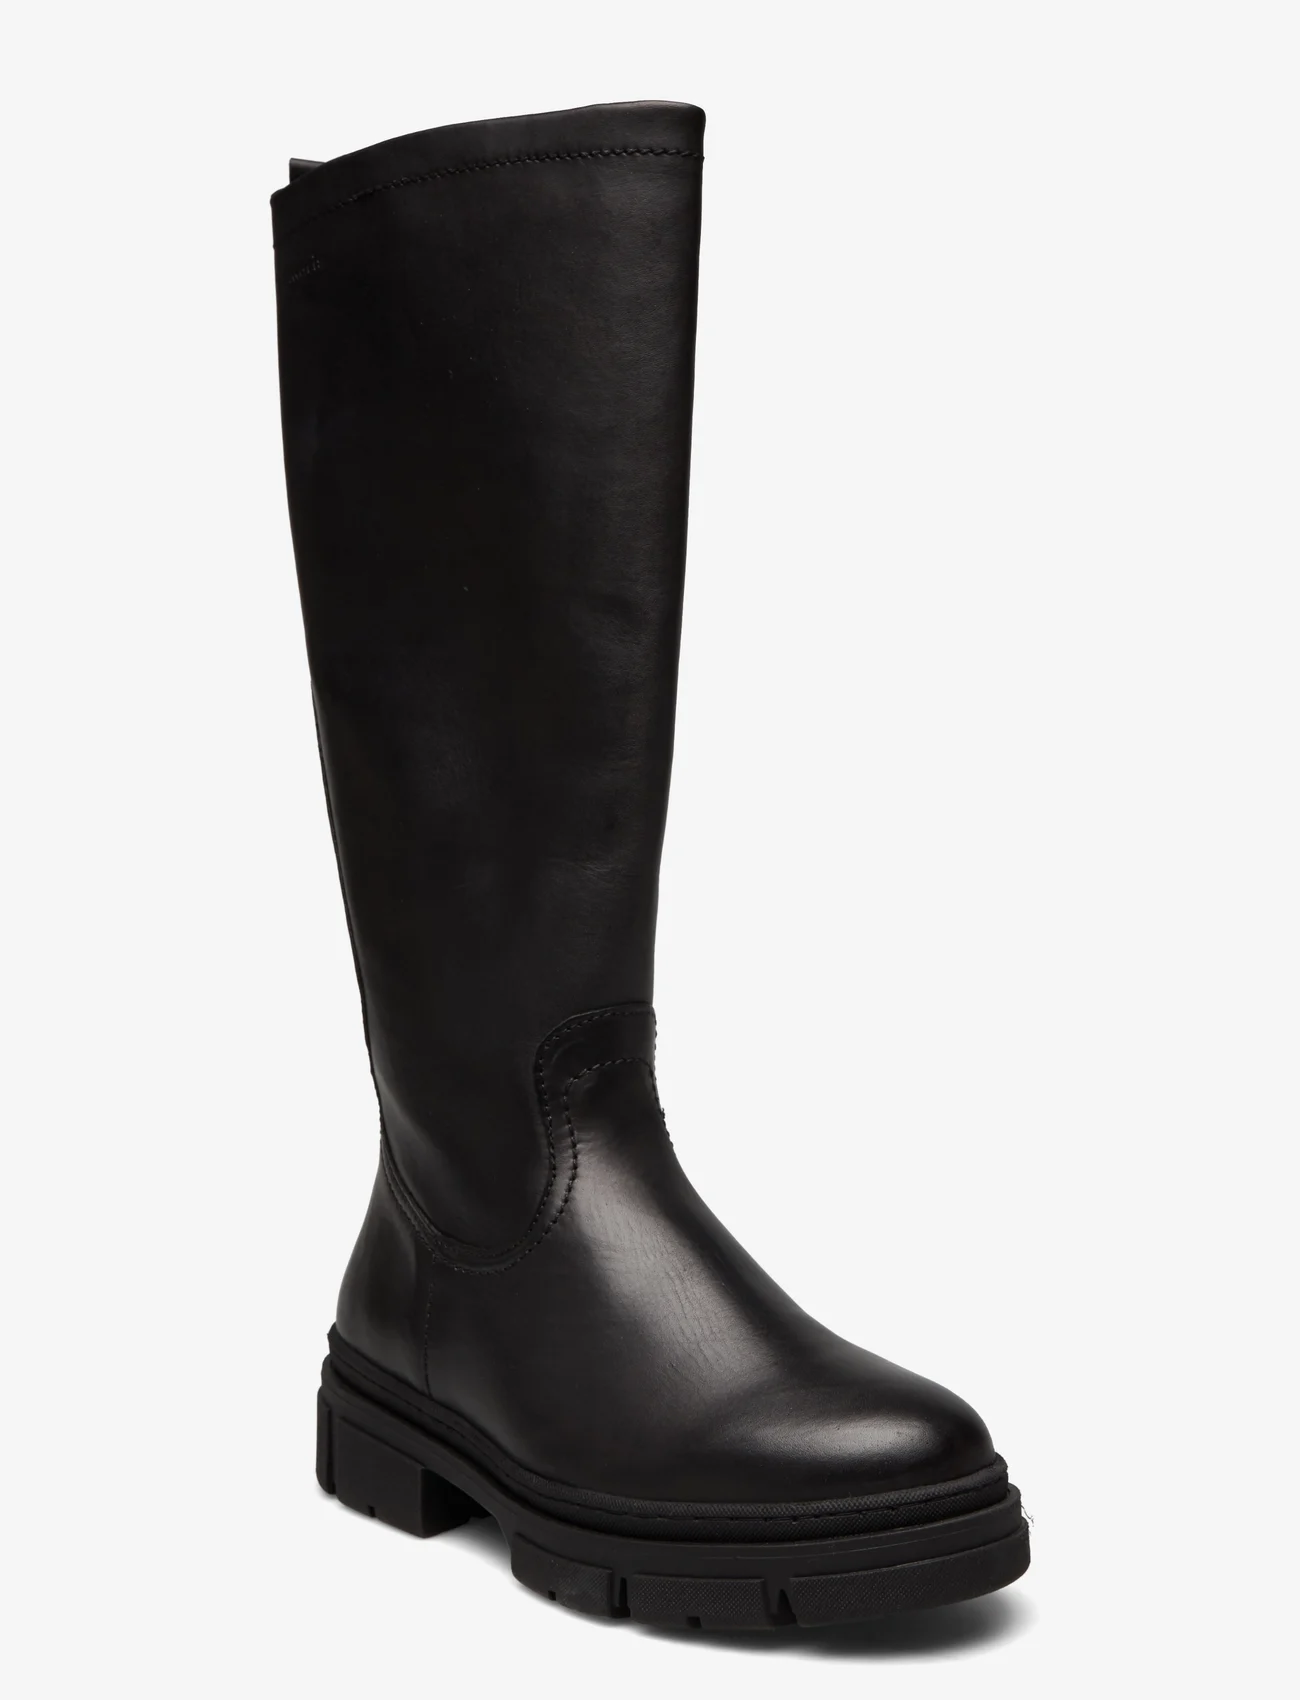 Tamaris - Woms Boots - black leather - 0